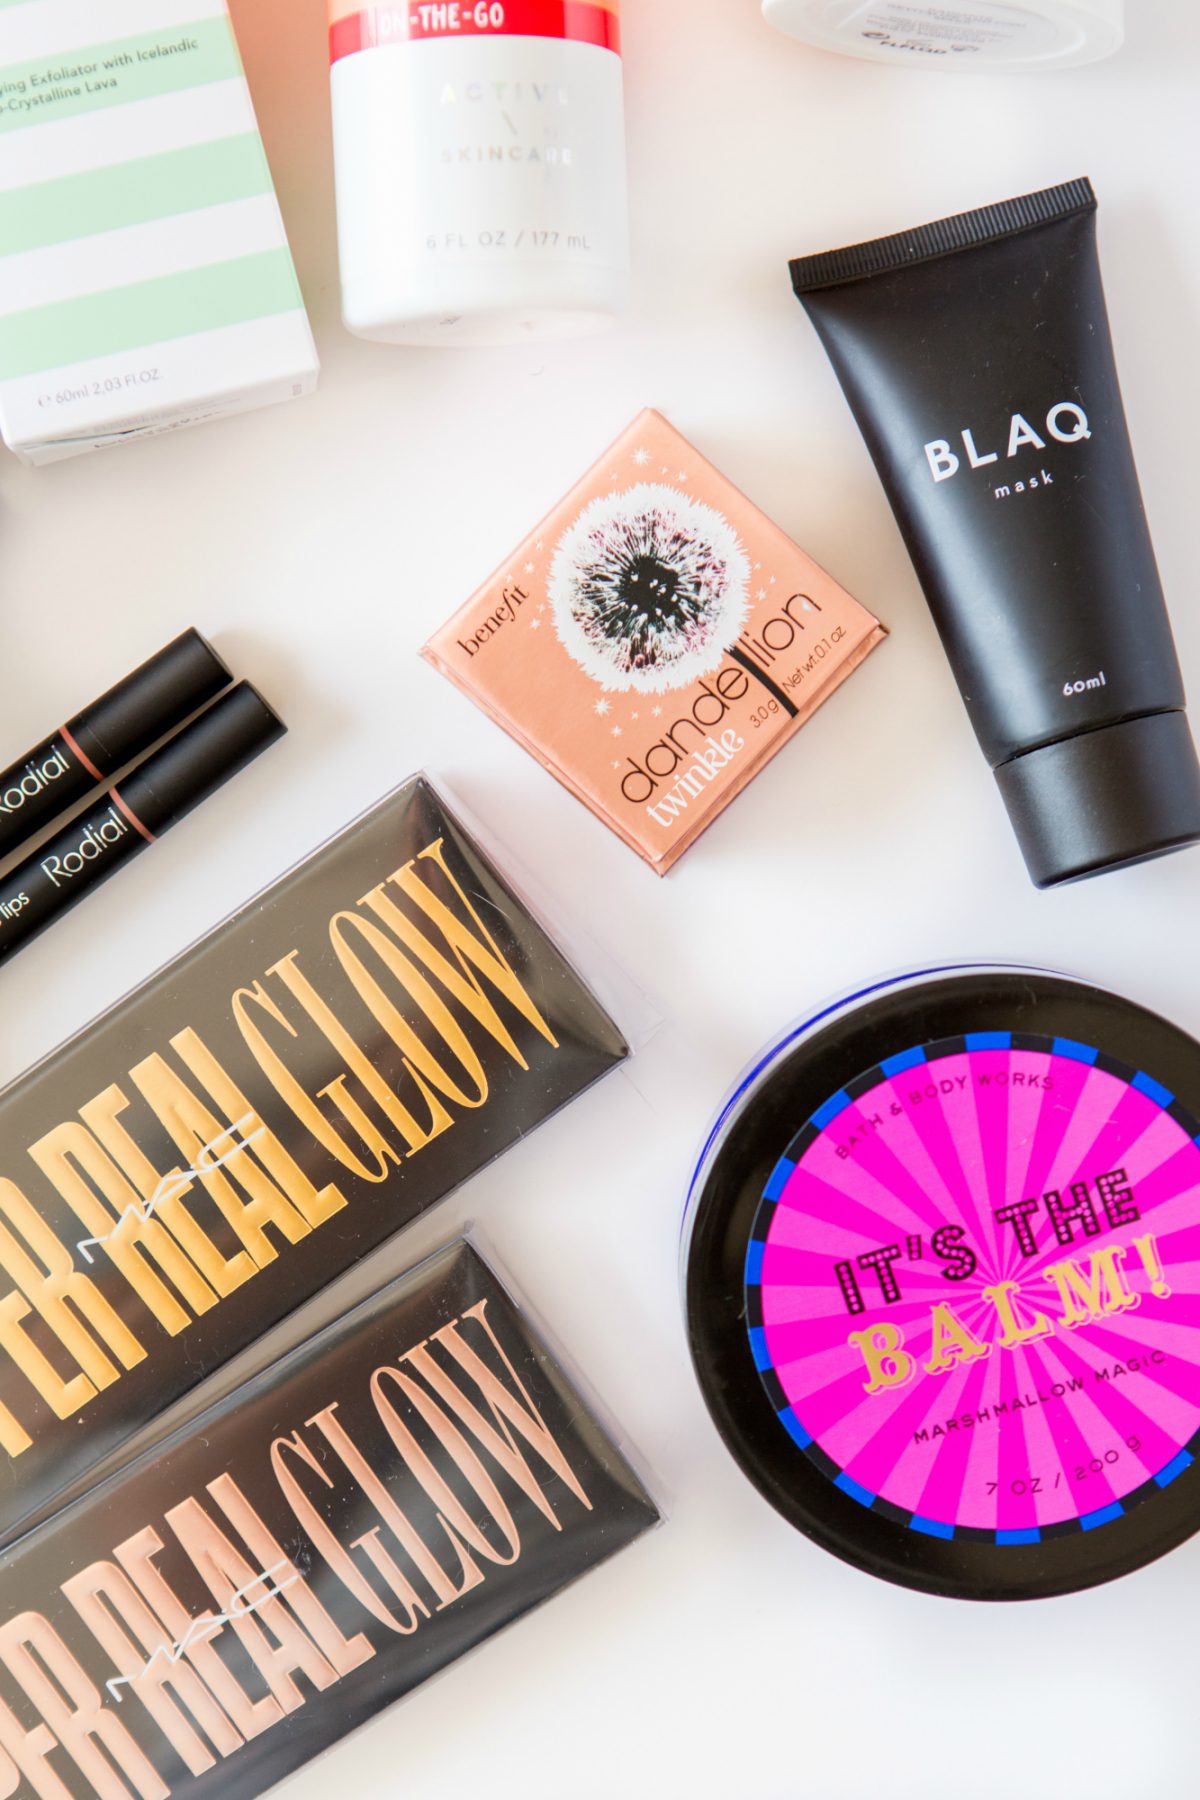 benefit, balq, it's the bal, rodial, and other products at March Favorites Giveaway